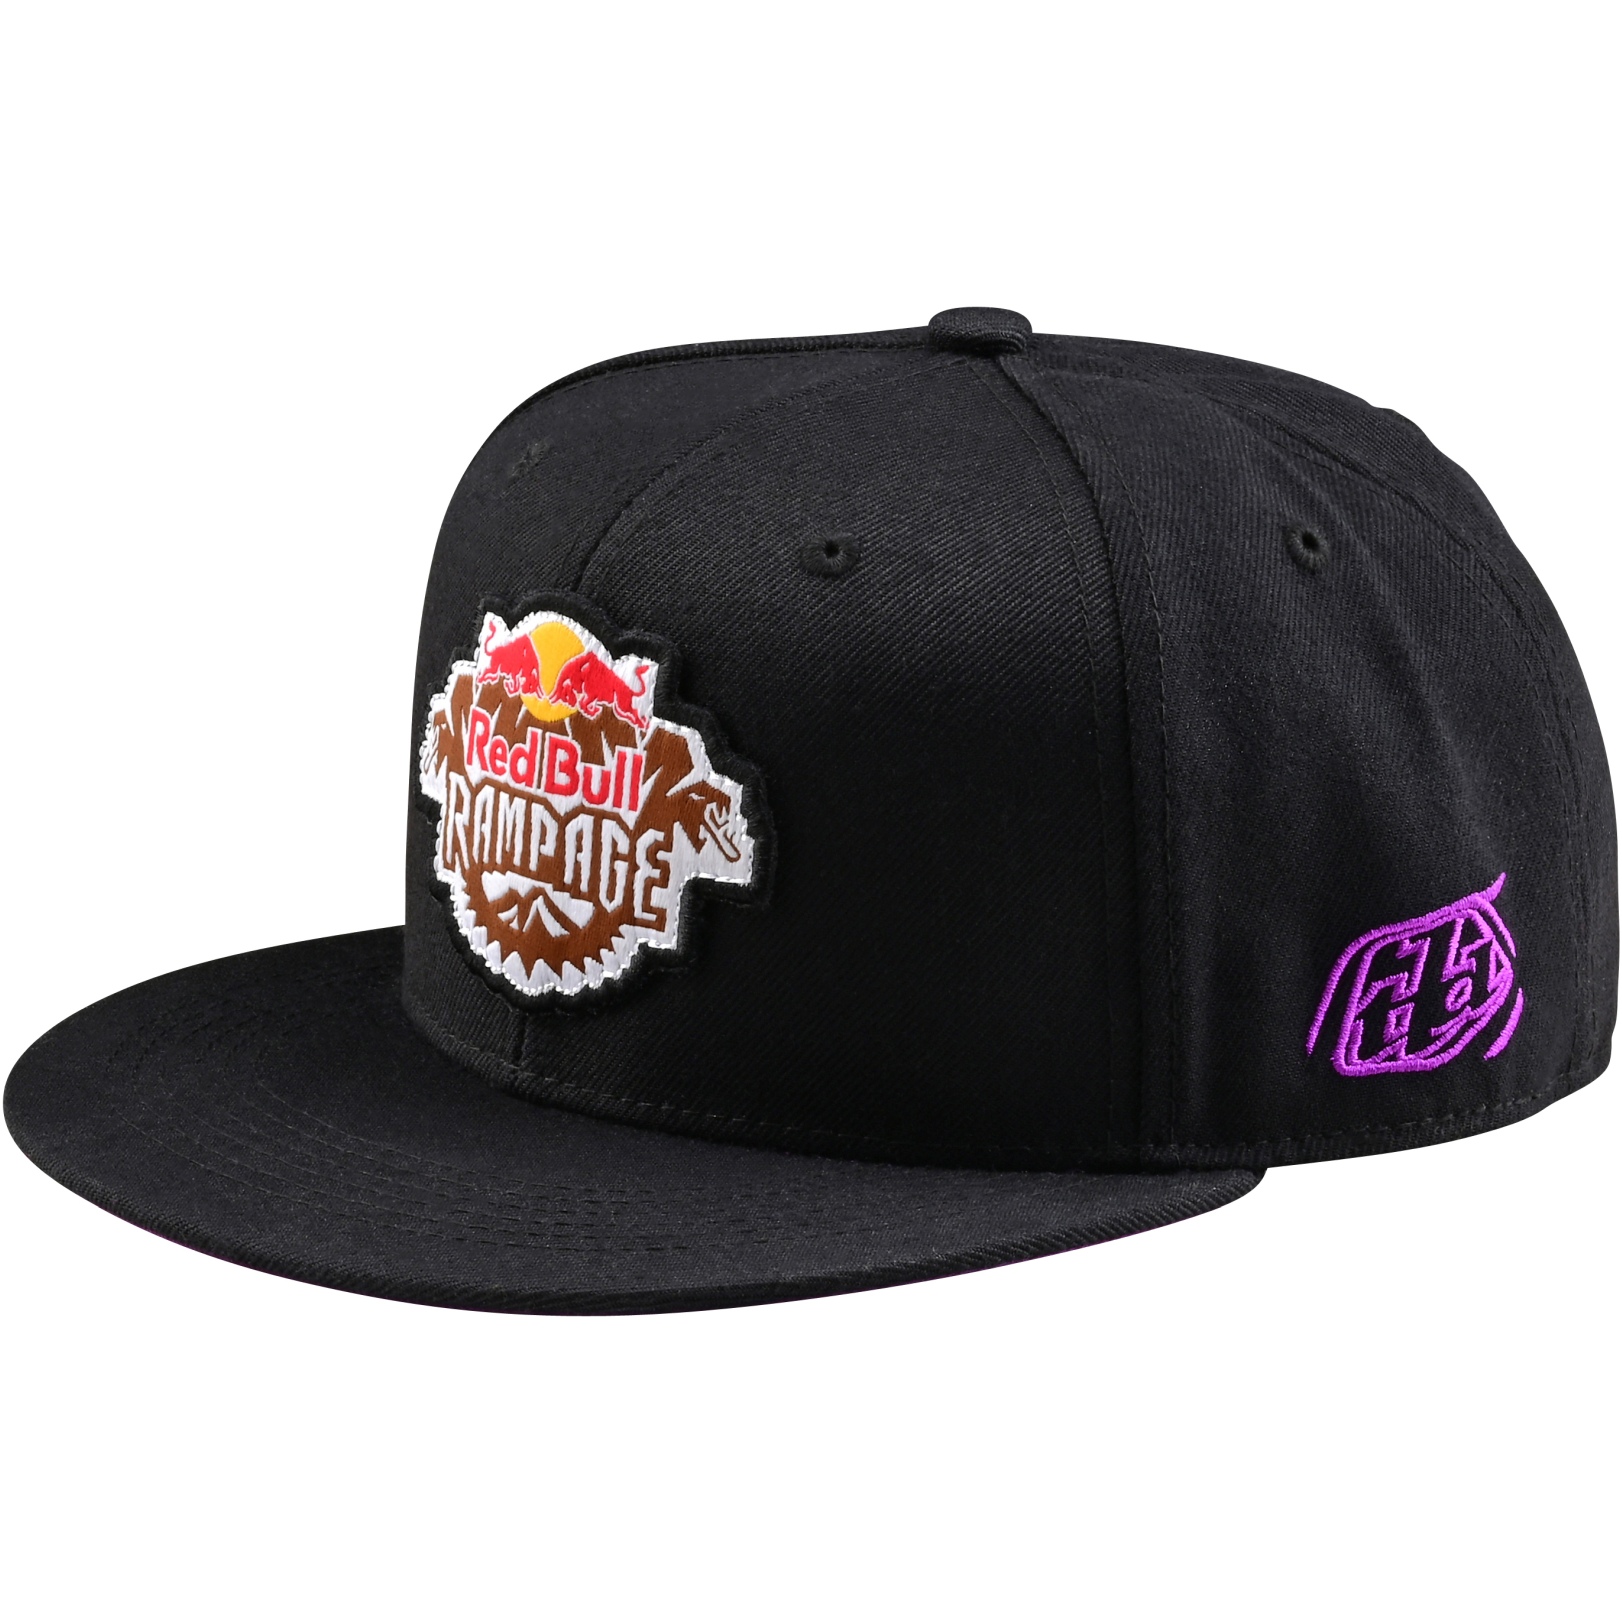 Picture of Troy Lee Designs Static Snapback Hat - 23 TLD Red Bull Rampage Logo - Black